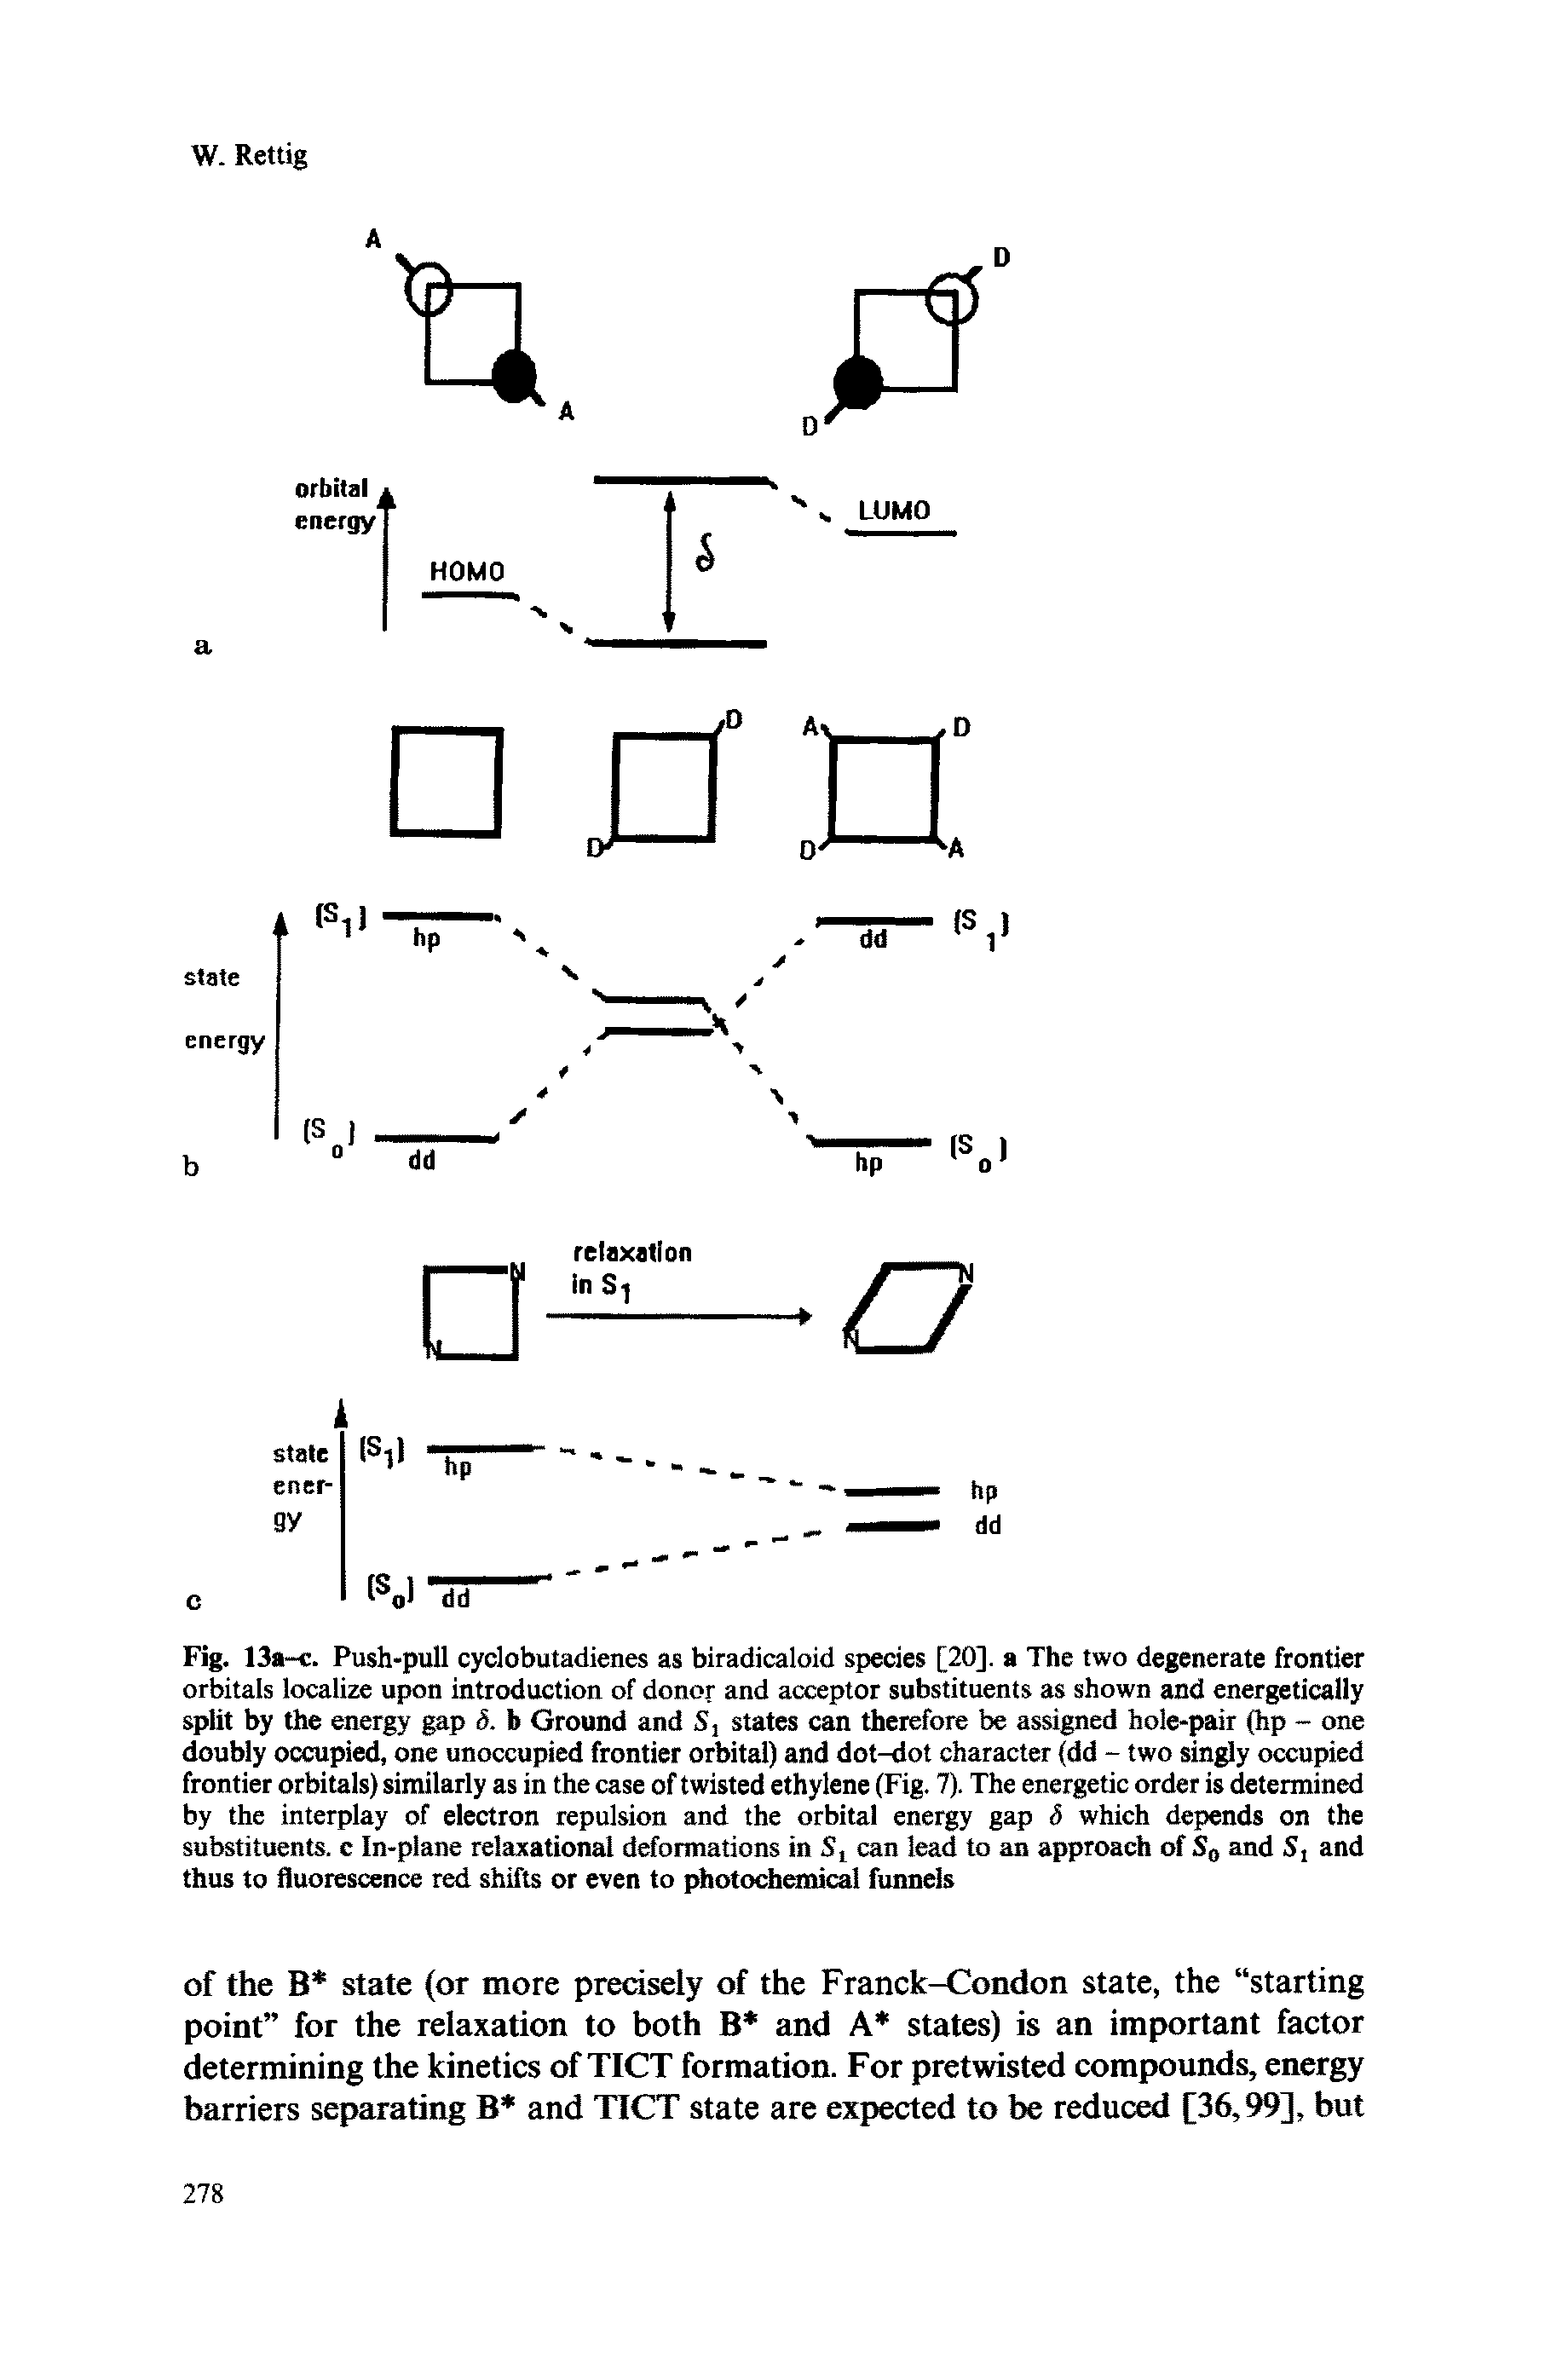 Fig. 13a-c. Push-pull cyclobutadienes as biradicaloid species [20]. a The two degenerate frontier orbitals localize upon introduction of donor and acceptor substituents as shown and energetically split by the energy gap b. b Ground and S, states can therefore be assigned hole-pair (hp - one doubly occupied, one unoccupied frontier orbital) and dot-dot character (dd - two singly occupied frontier orbitals) similarly as in the case of twisted ethylene (Fig. 7). The energetic order is determined by the interplay of electron repulsion and the orbital energy gap h which depends on the substituents, c In-plane relaxational deformations in Si can lead to an approach of S and S, and thus to fluorescence red shifts or even to photochemical funnels...